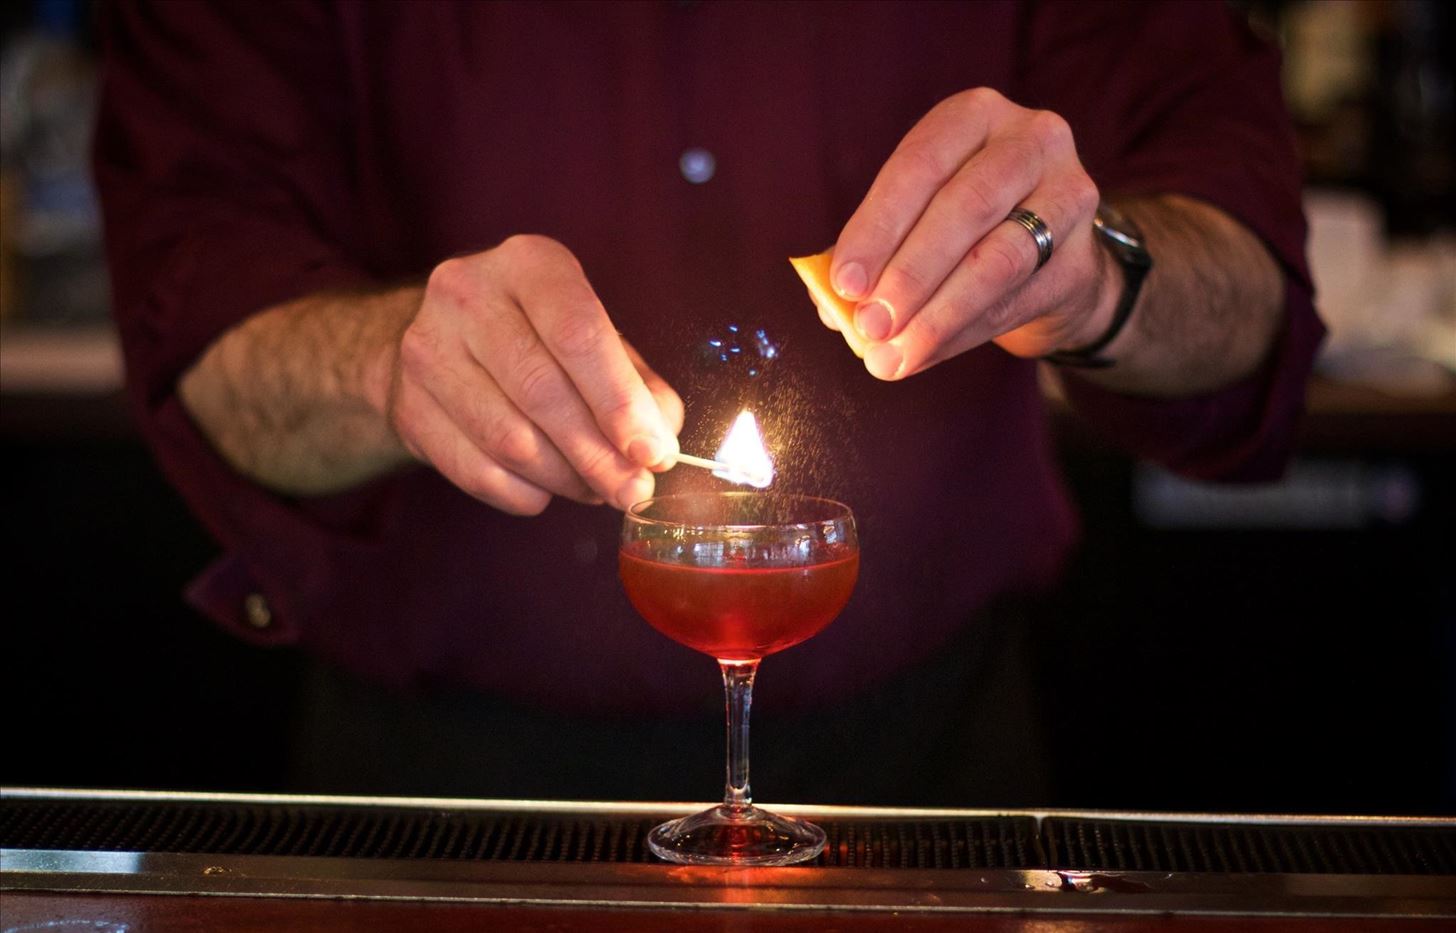 Impress Your Drinking Buddies with These 10 Pro Cocktail Hacks